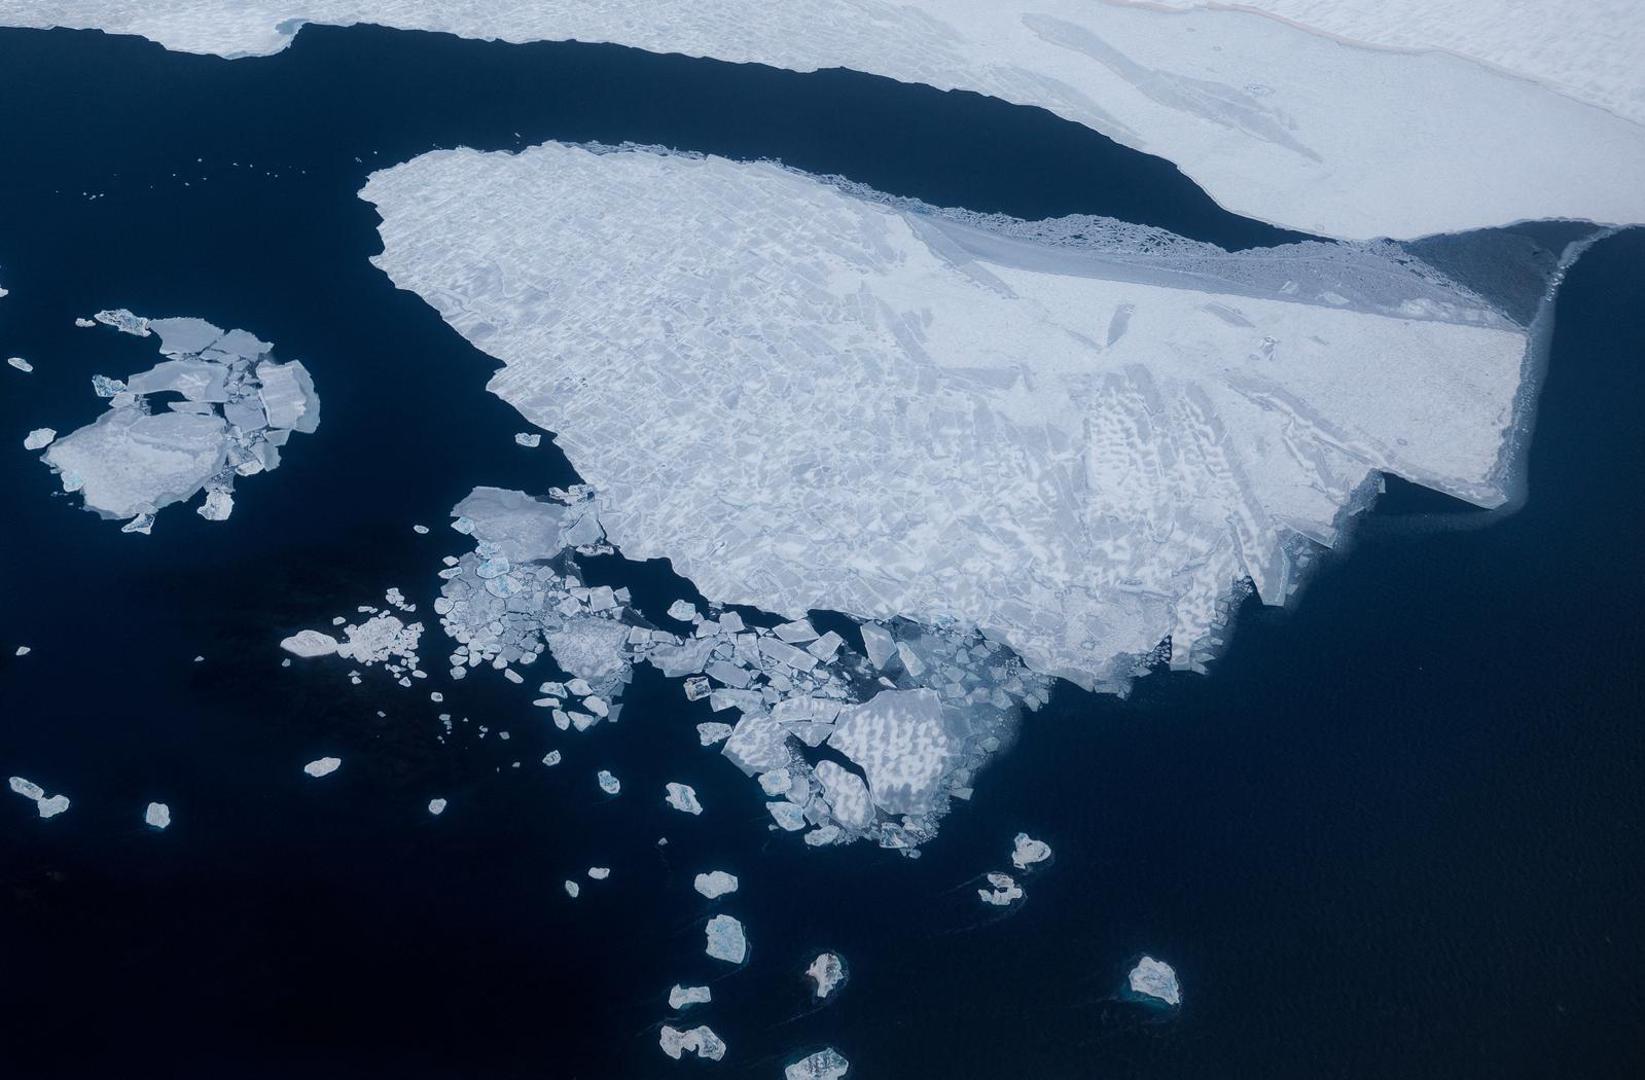 Sea ice in the Arctic Ocean is seen near Ny-Aalesund, Svalbard, Norway, April 5, 2023. Researchers have been studying the polar region for decades, with Ny-Aalesund's weather records going back more than 40 years, but as Svalbard temperatures climb up to seven times faster than the global average, scientists' work has become vitally important because what happens in the Arctic can impact global sea levels, storms in North America and Europe, and other factors far beyond the frozen region. REUTERS/Lisi Niesner SEARCH "NIESNER ICE" FOR THIS STORY. SEARCH "WIDER IMAGE" FOR ALL STORIES. Photo: LISI NIESNER/REUTERS